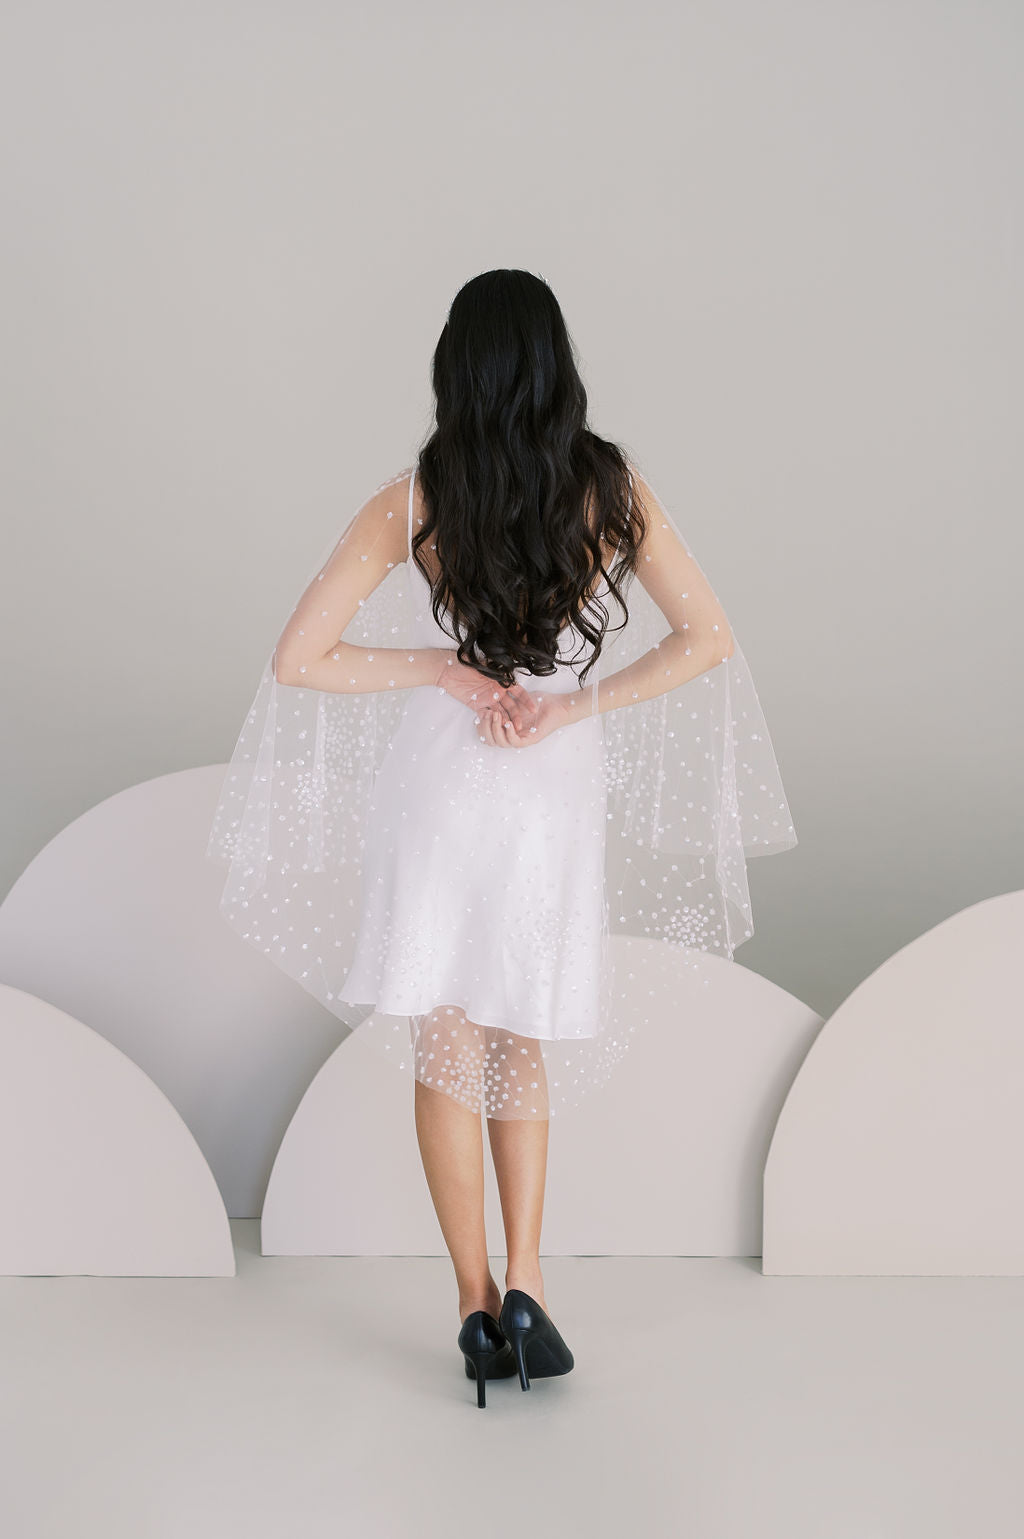 Celestial beaded tulle bridal cape. Waist length in front, knee length in back. Handmade by Catherine Langlois, Toronto, Canada.